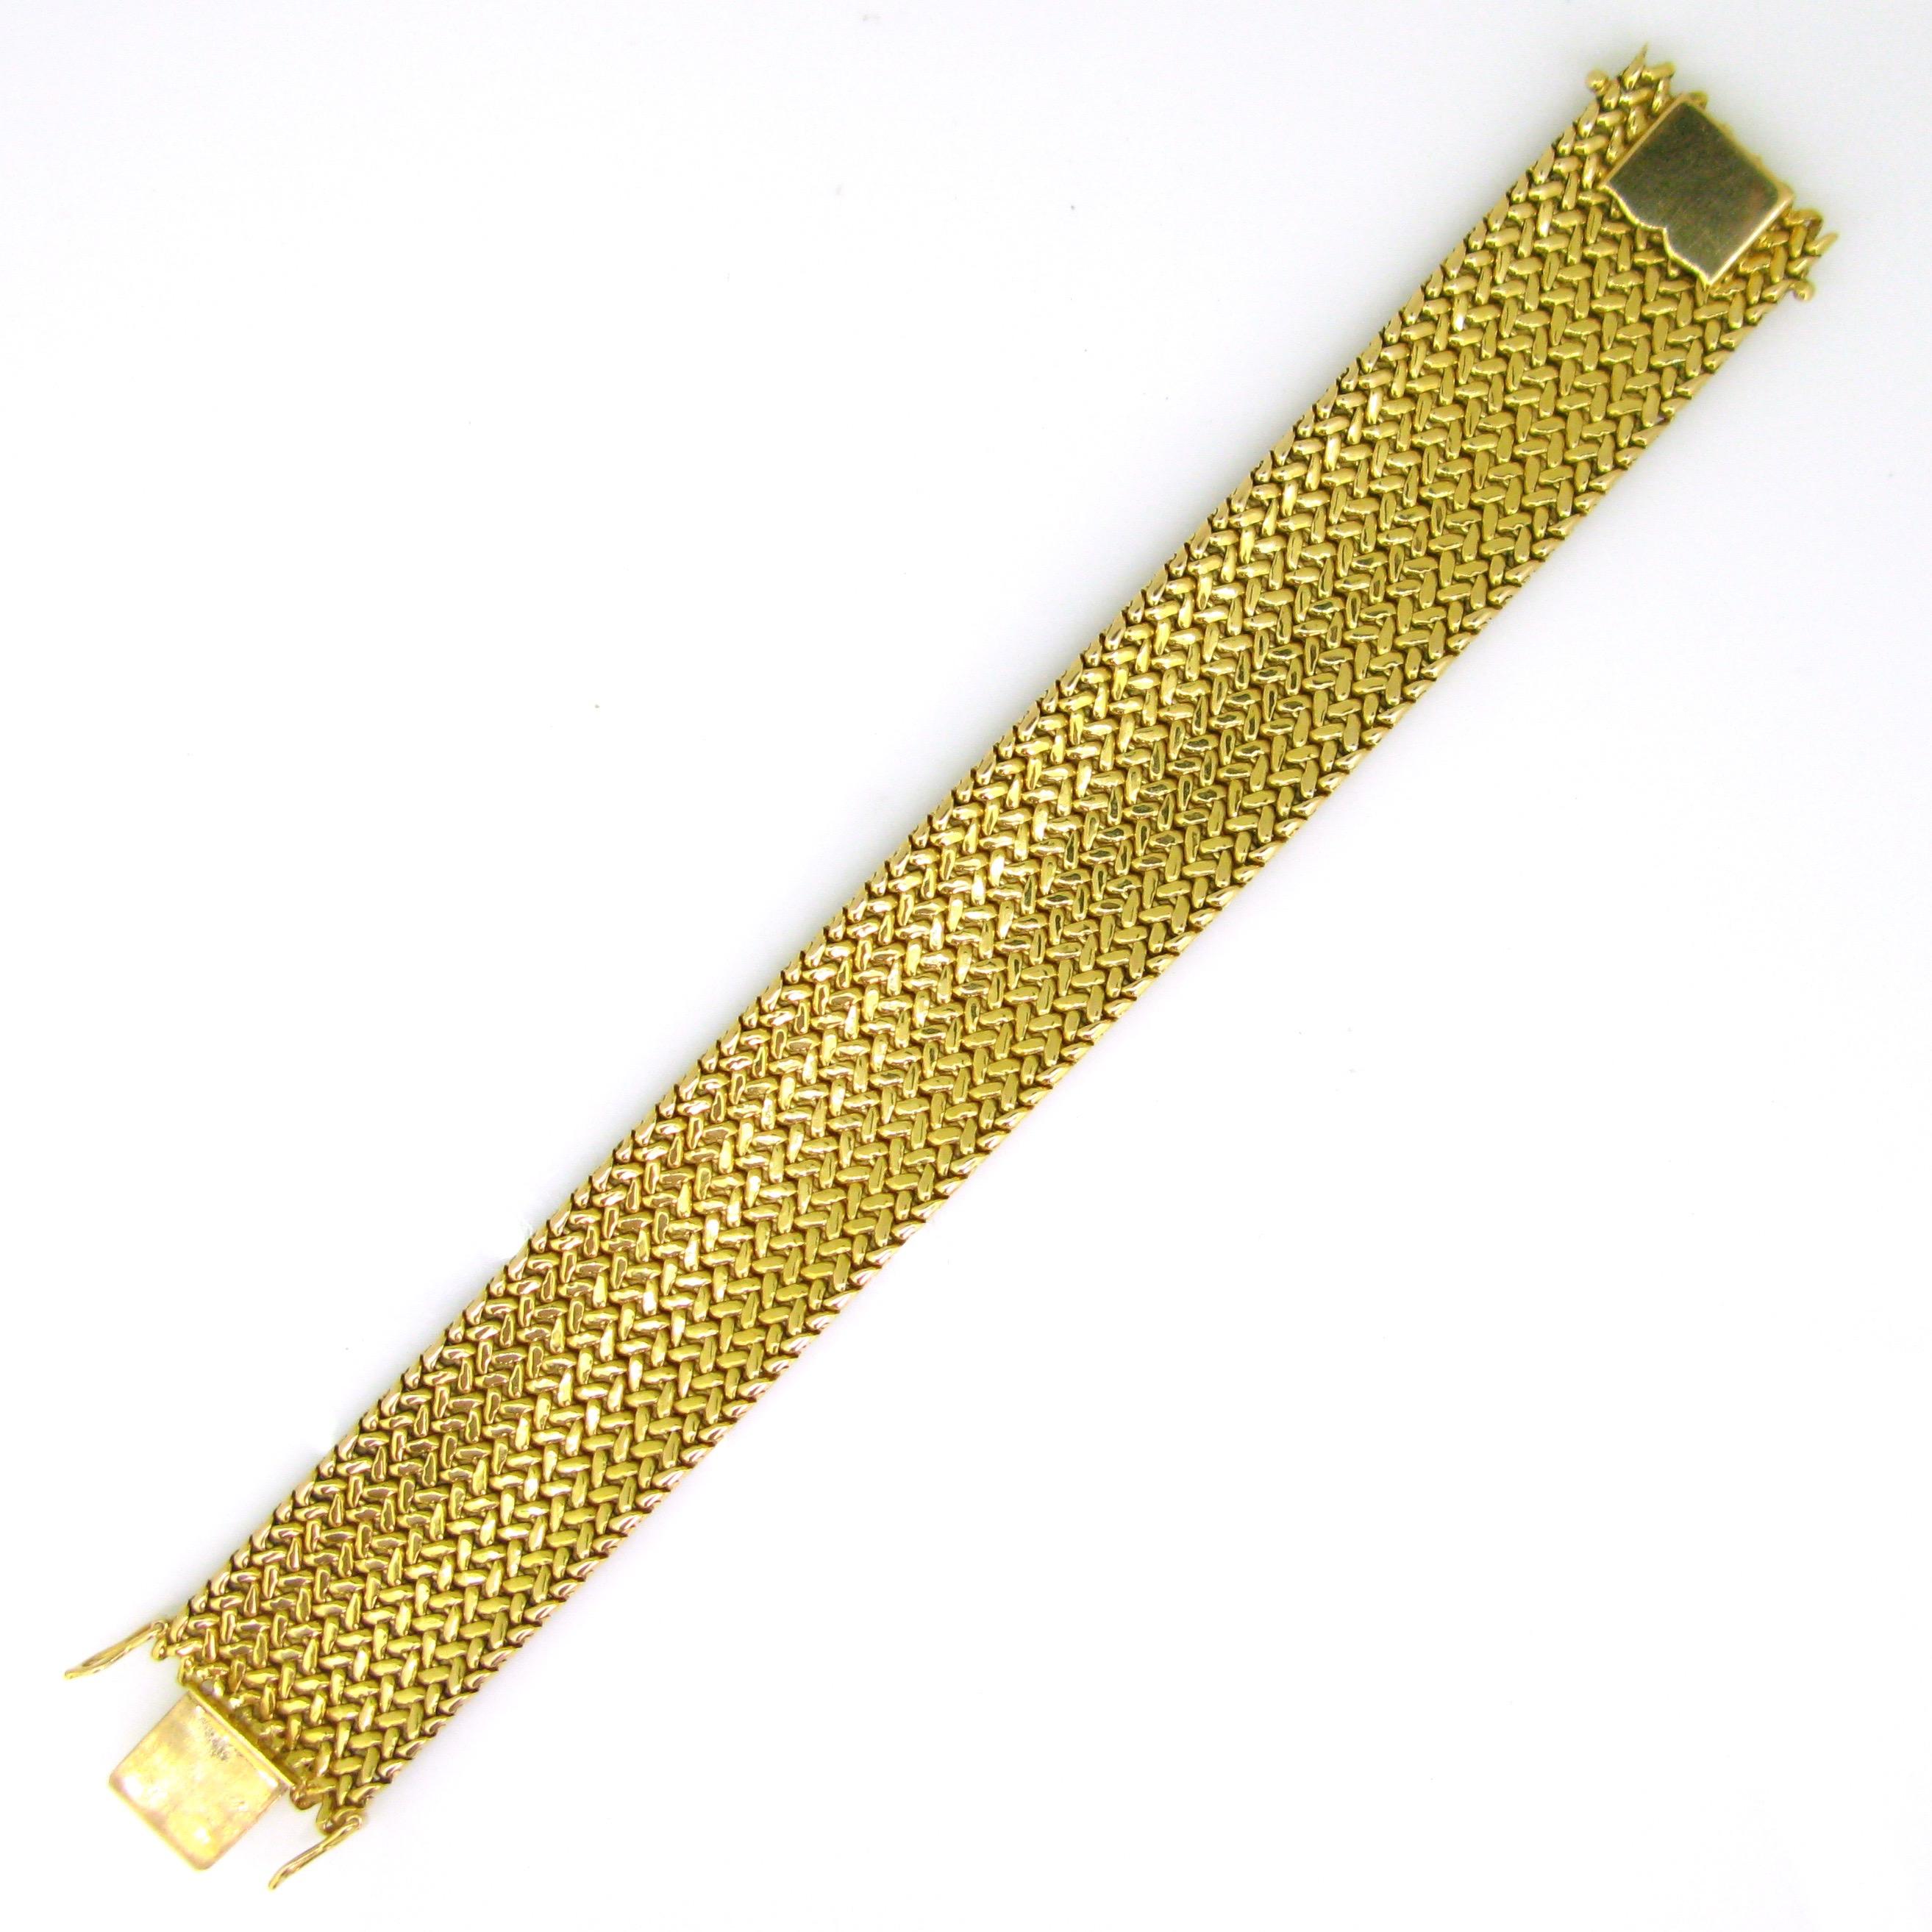 Woven Mesh Large Textured Yellow Gold Cuff Bracelet 2